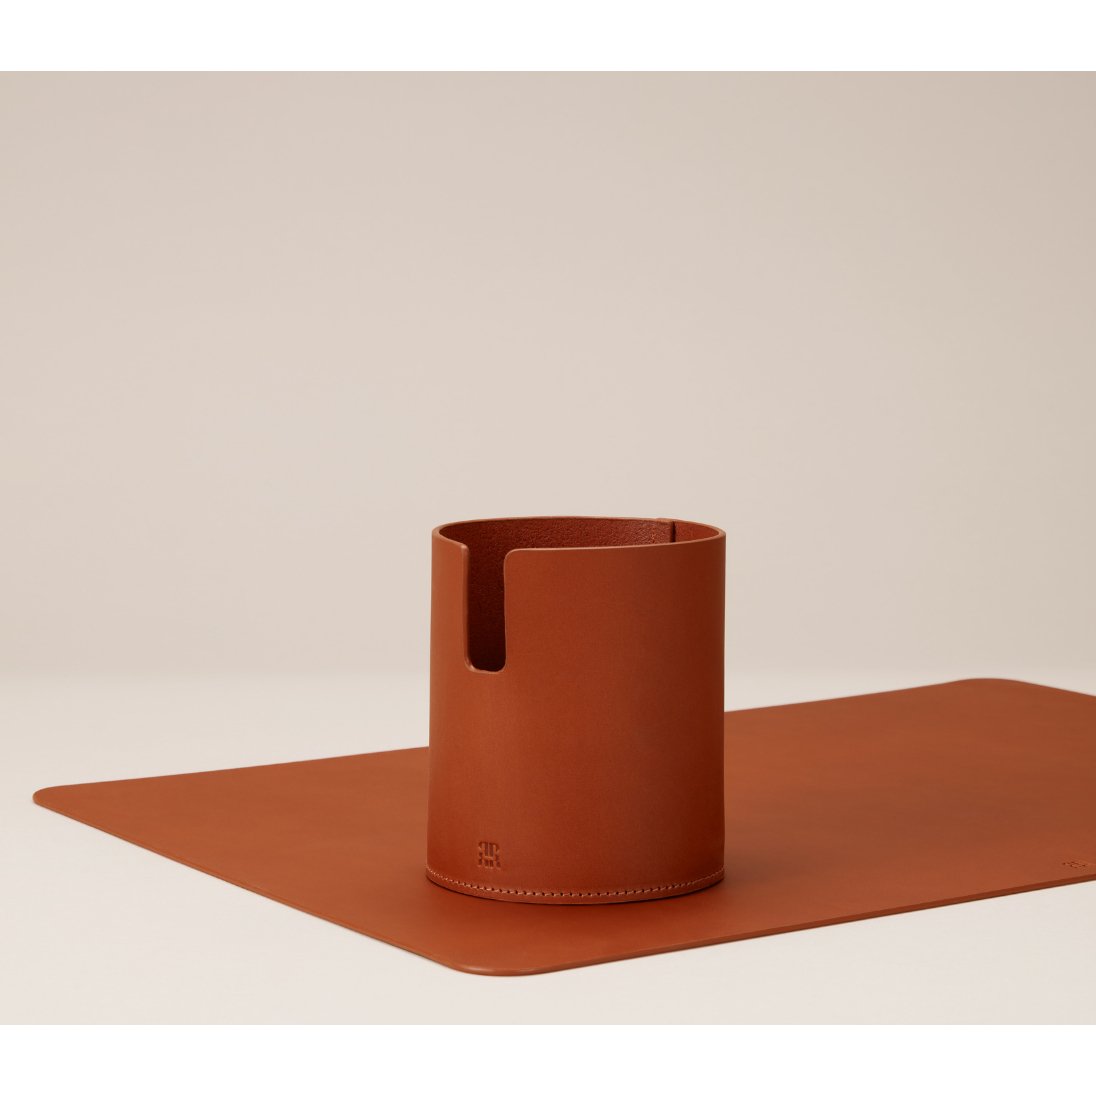 Keep your desk tidy and organised with the Paradise Row contemporary leather pencil pot or pair it with the luxury matching desk mat to create a beautiful gift set or ultimate home office setup.